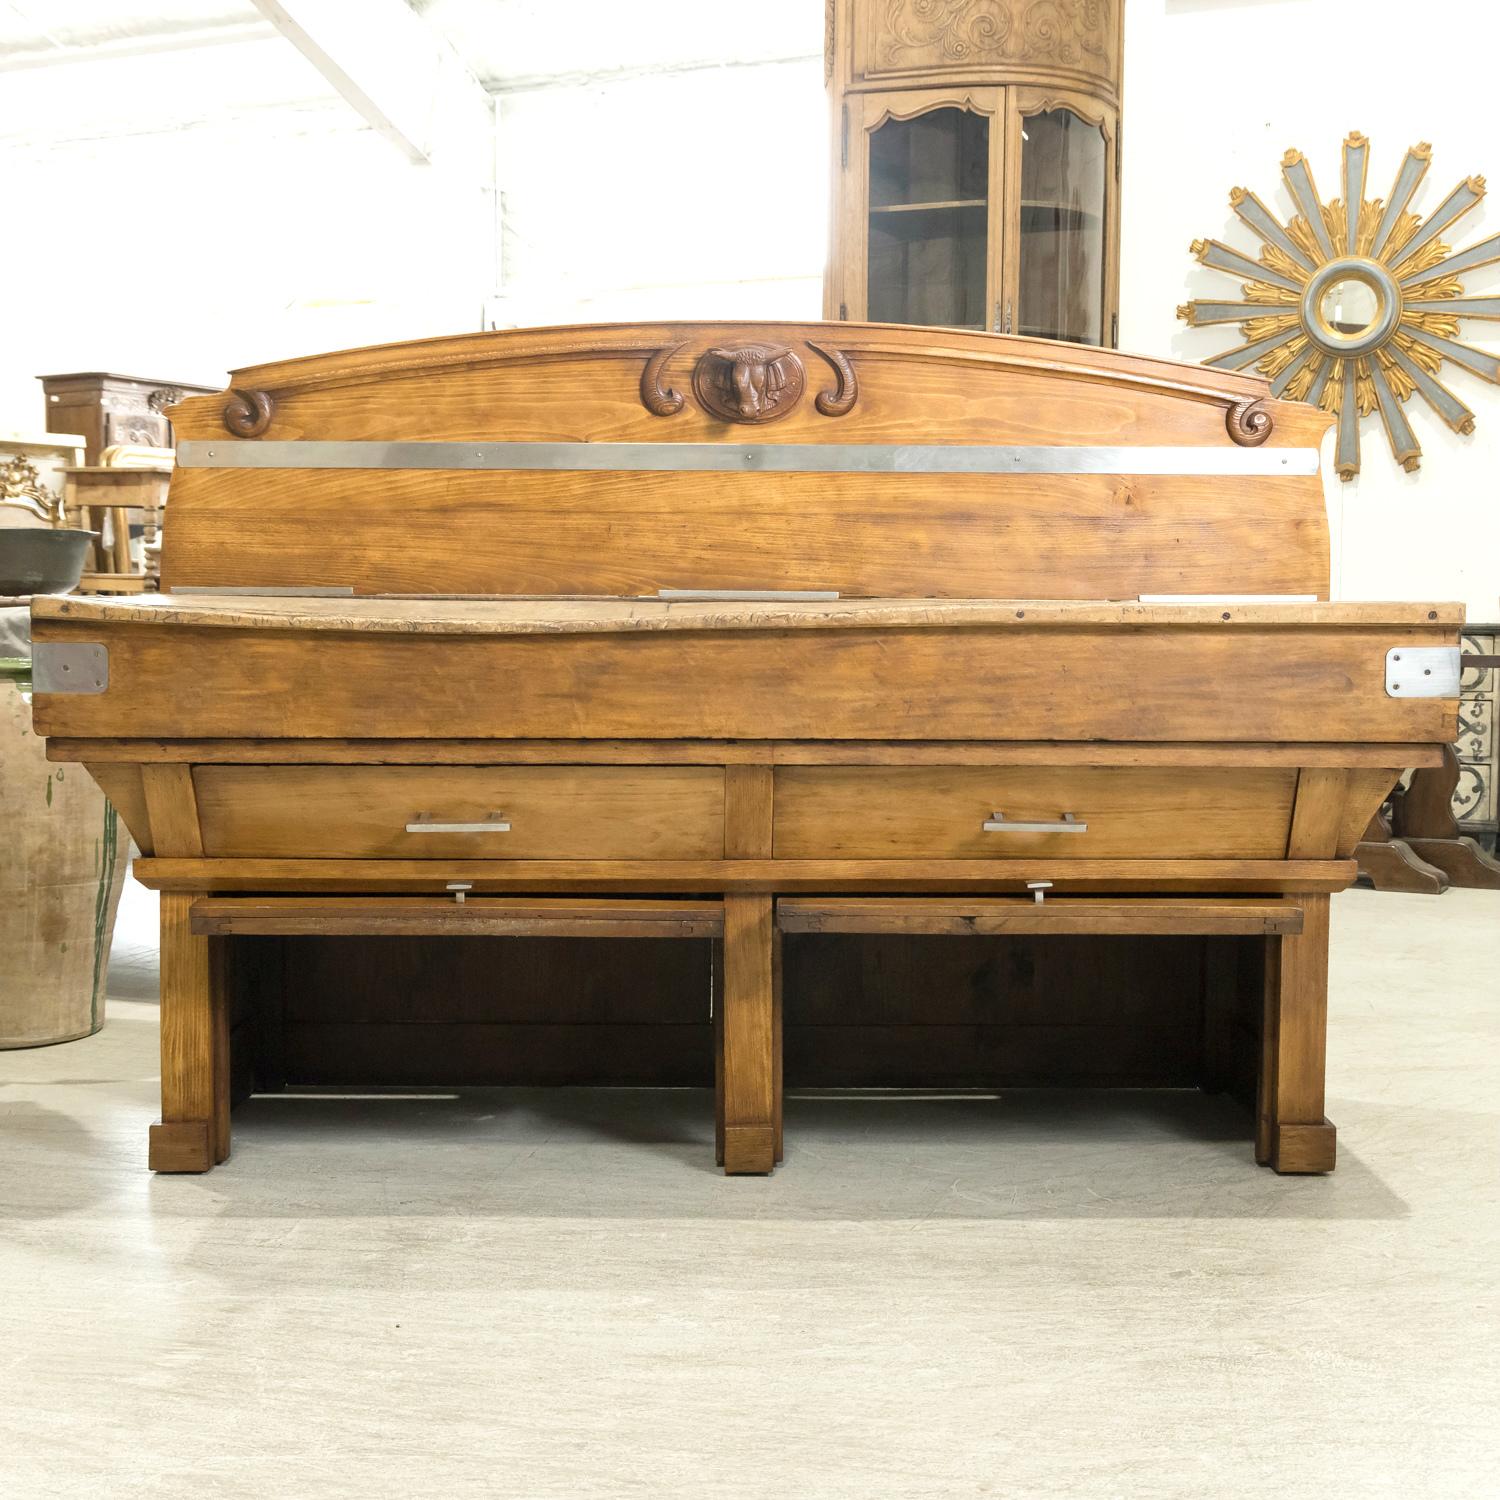 Hand-Crafted Large Early 20th Century French Double Billot de Boucher or Butcher Block For Sale